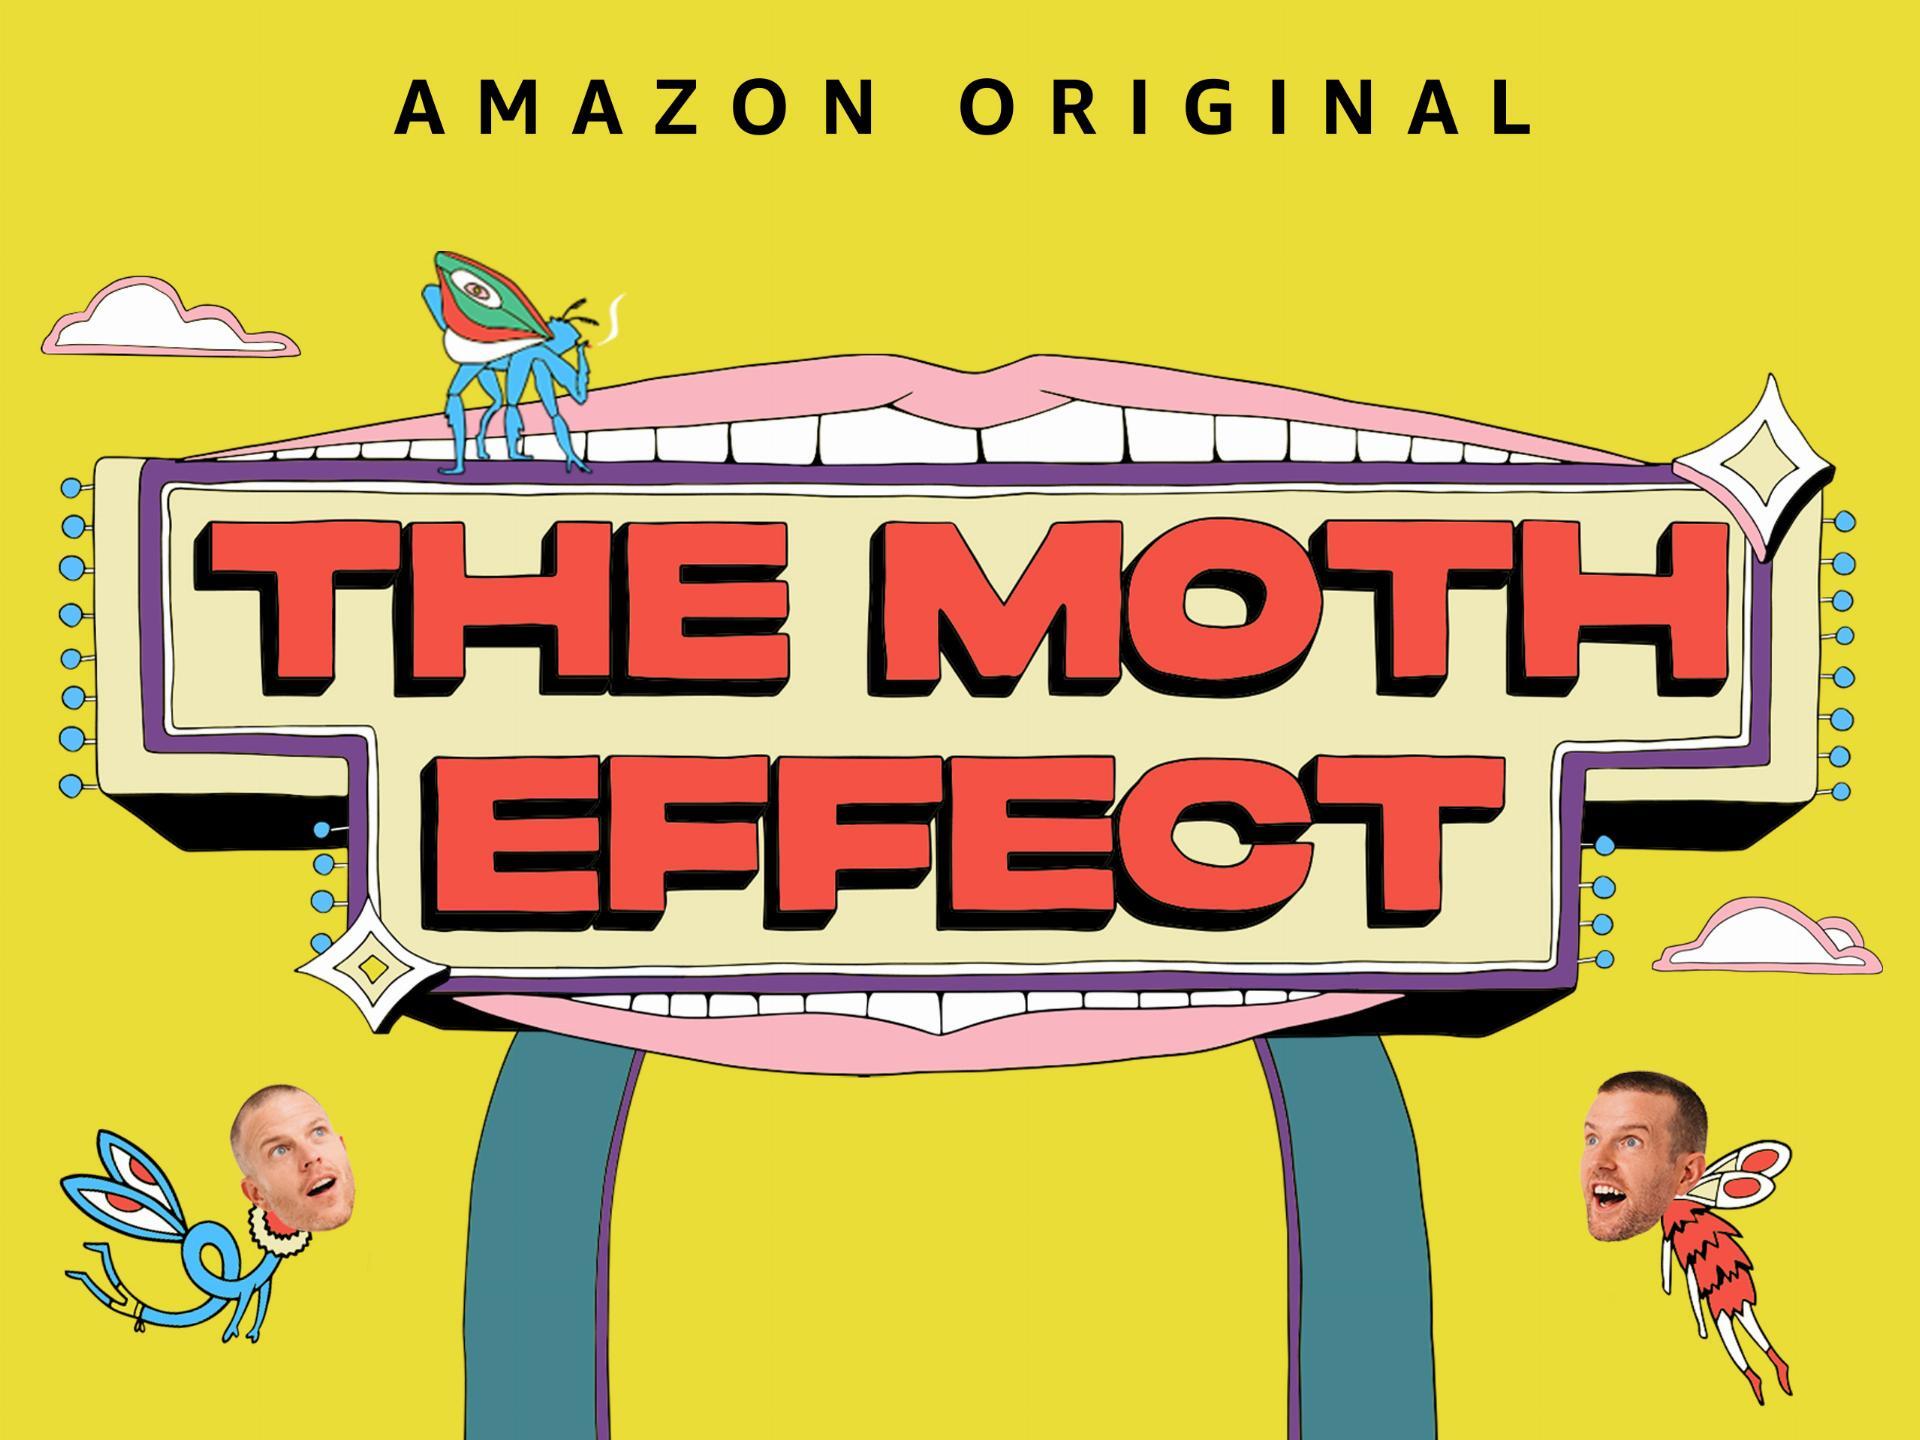 The Moth Effect